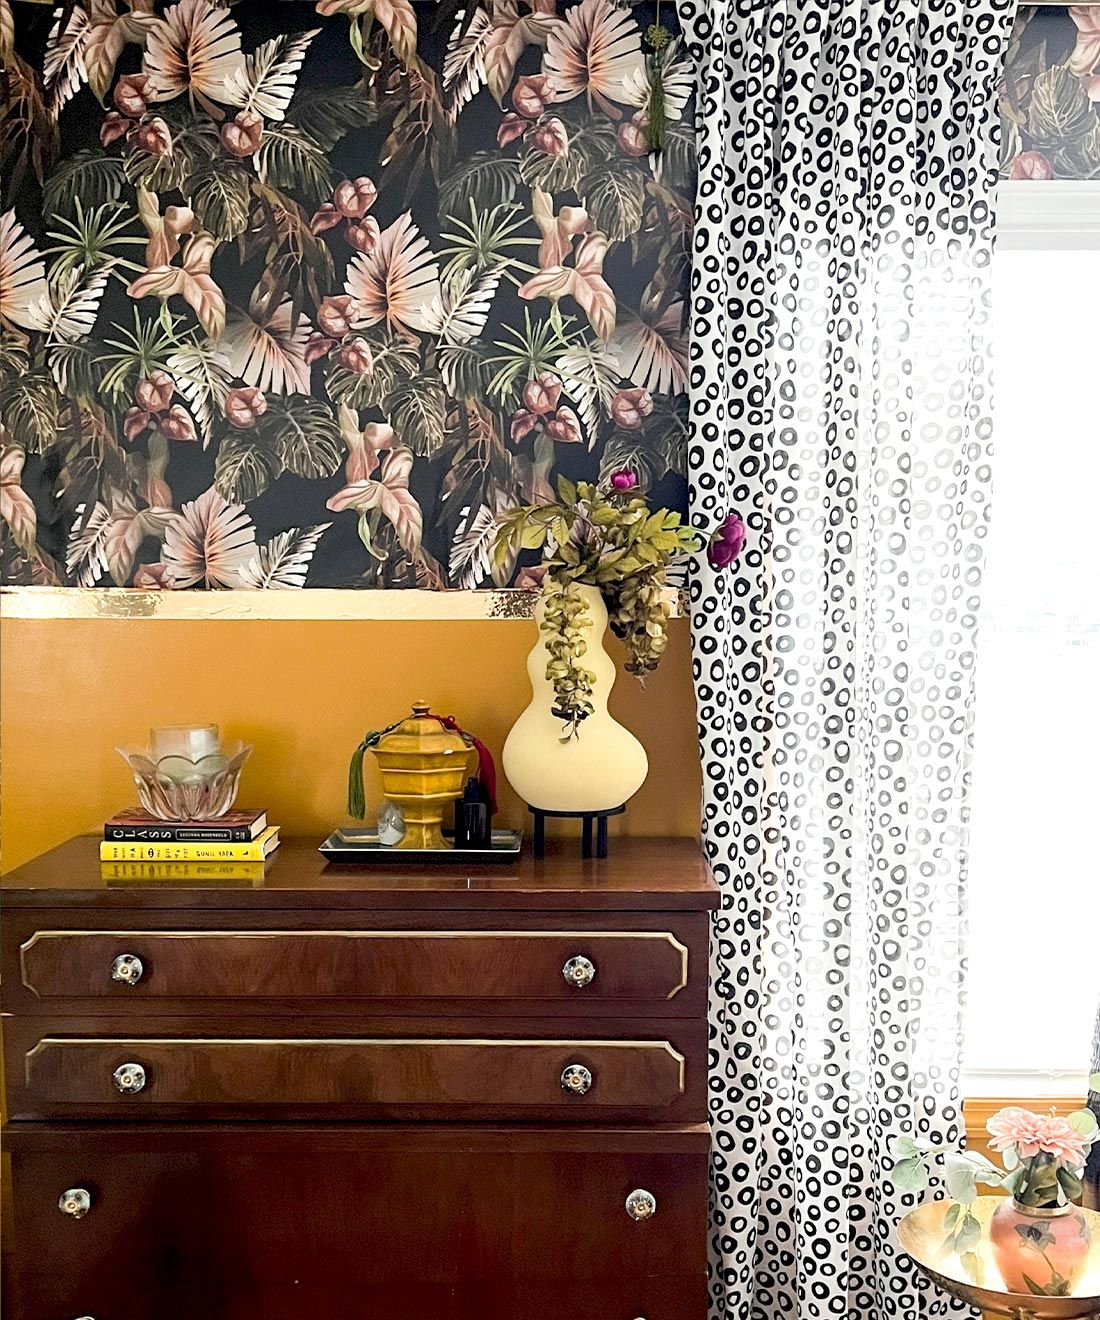 Night Jungle Wallpaper • Kip&co • Leafy Tropical Wallpaper • Insitu by Tiffany Brown MyEclecticNest